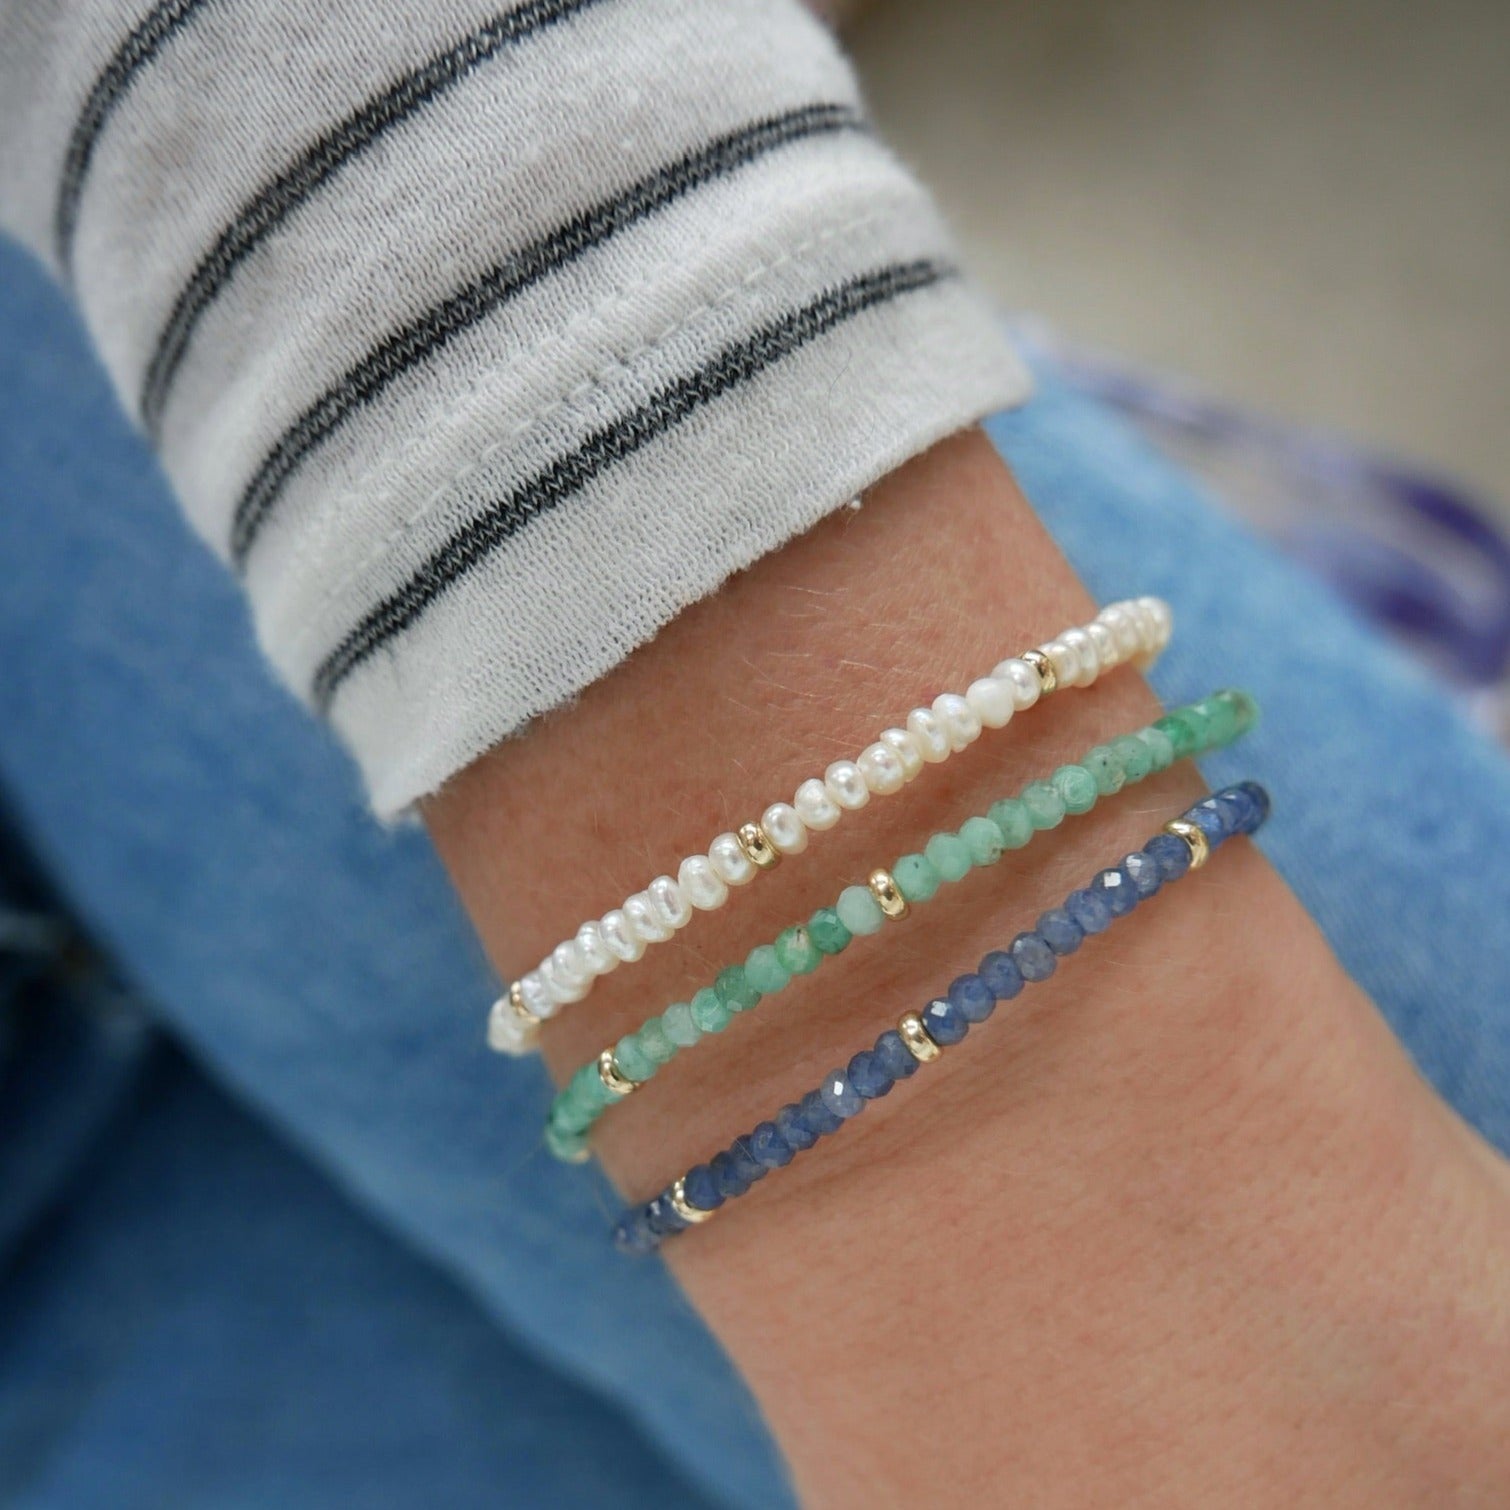 The Beaded Bracelet Gift Set - Pearl, Aquamarine, and Blue Sapphire Options Styled on Wrist